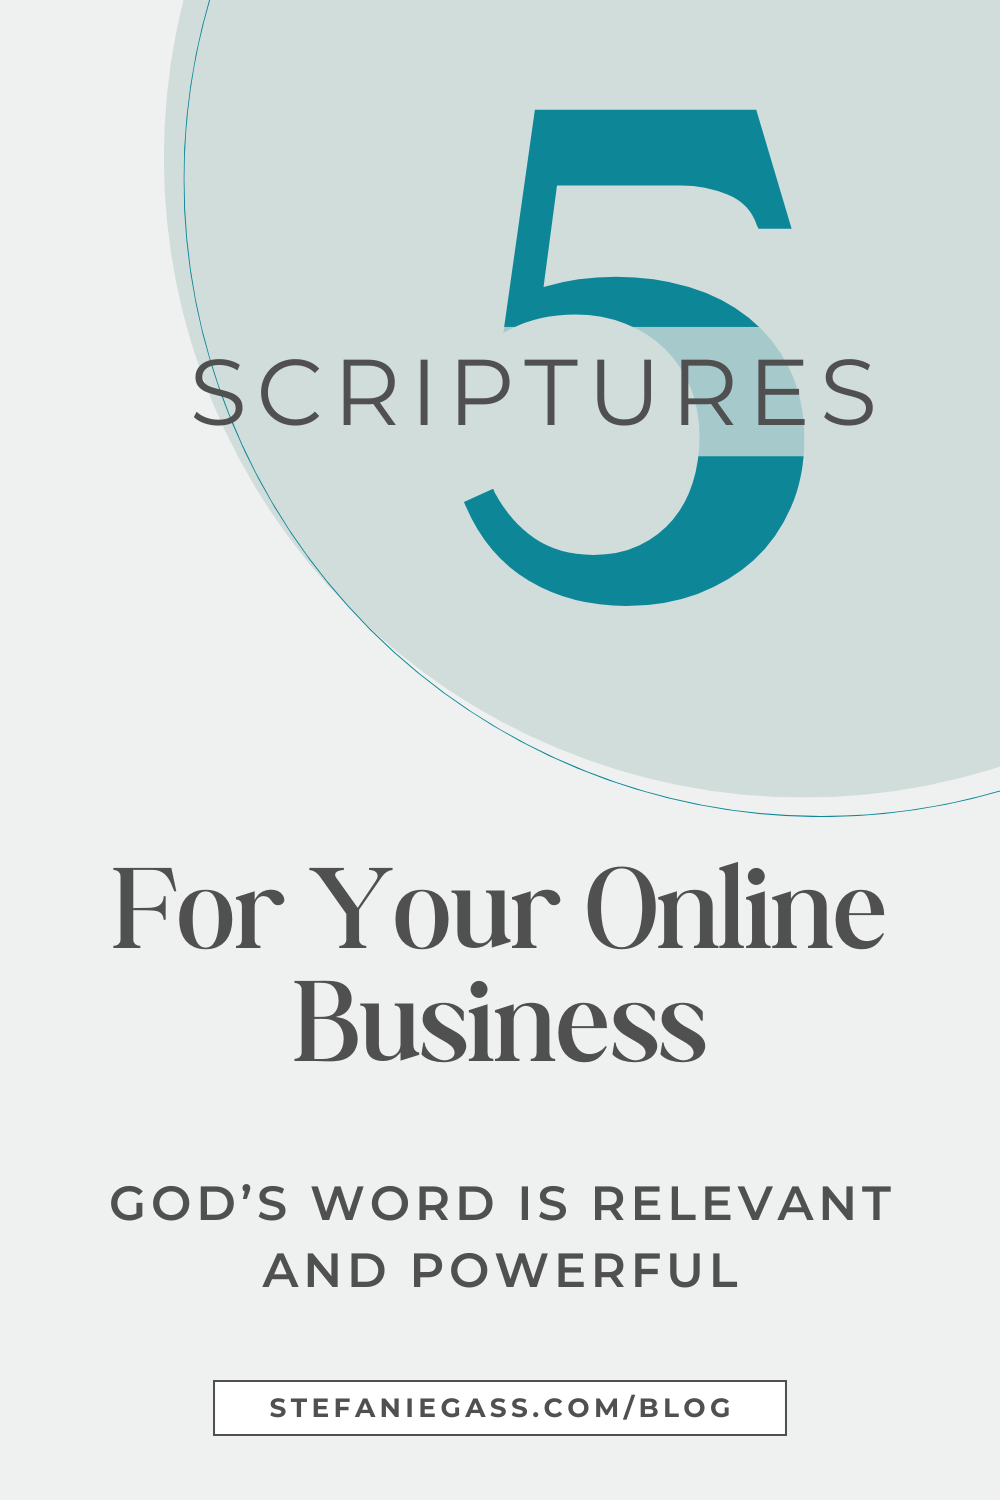 Image reads: 5 Scriptures for your online business.  God's word is relevant and powerful, Stefanie Gass Blog